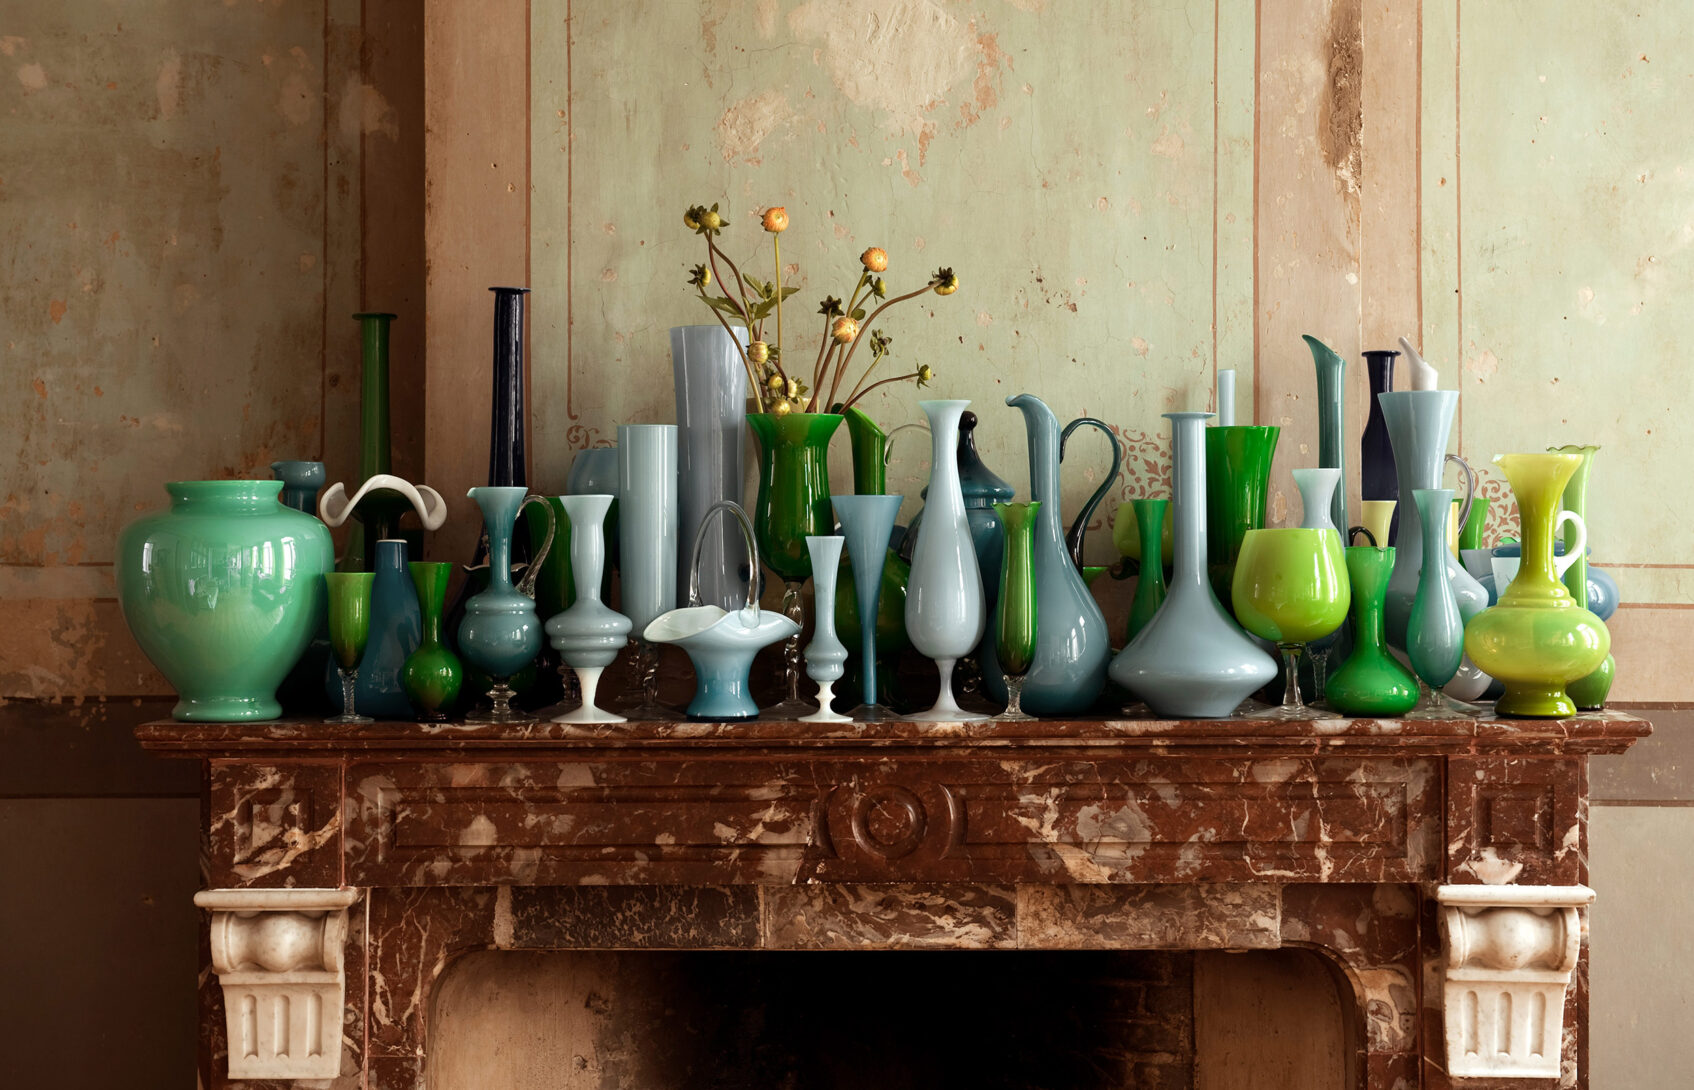 A mantle displaying an extensive collection of green and blue glass vases